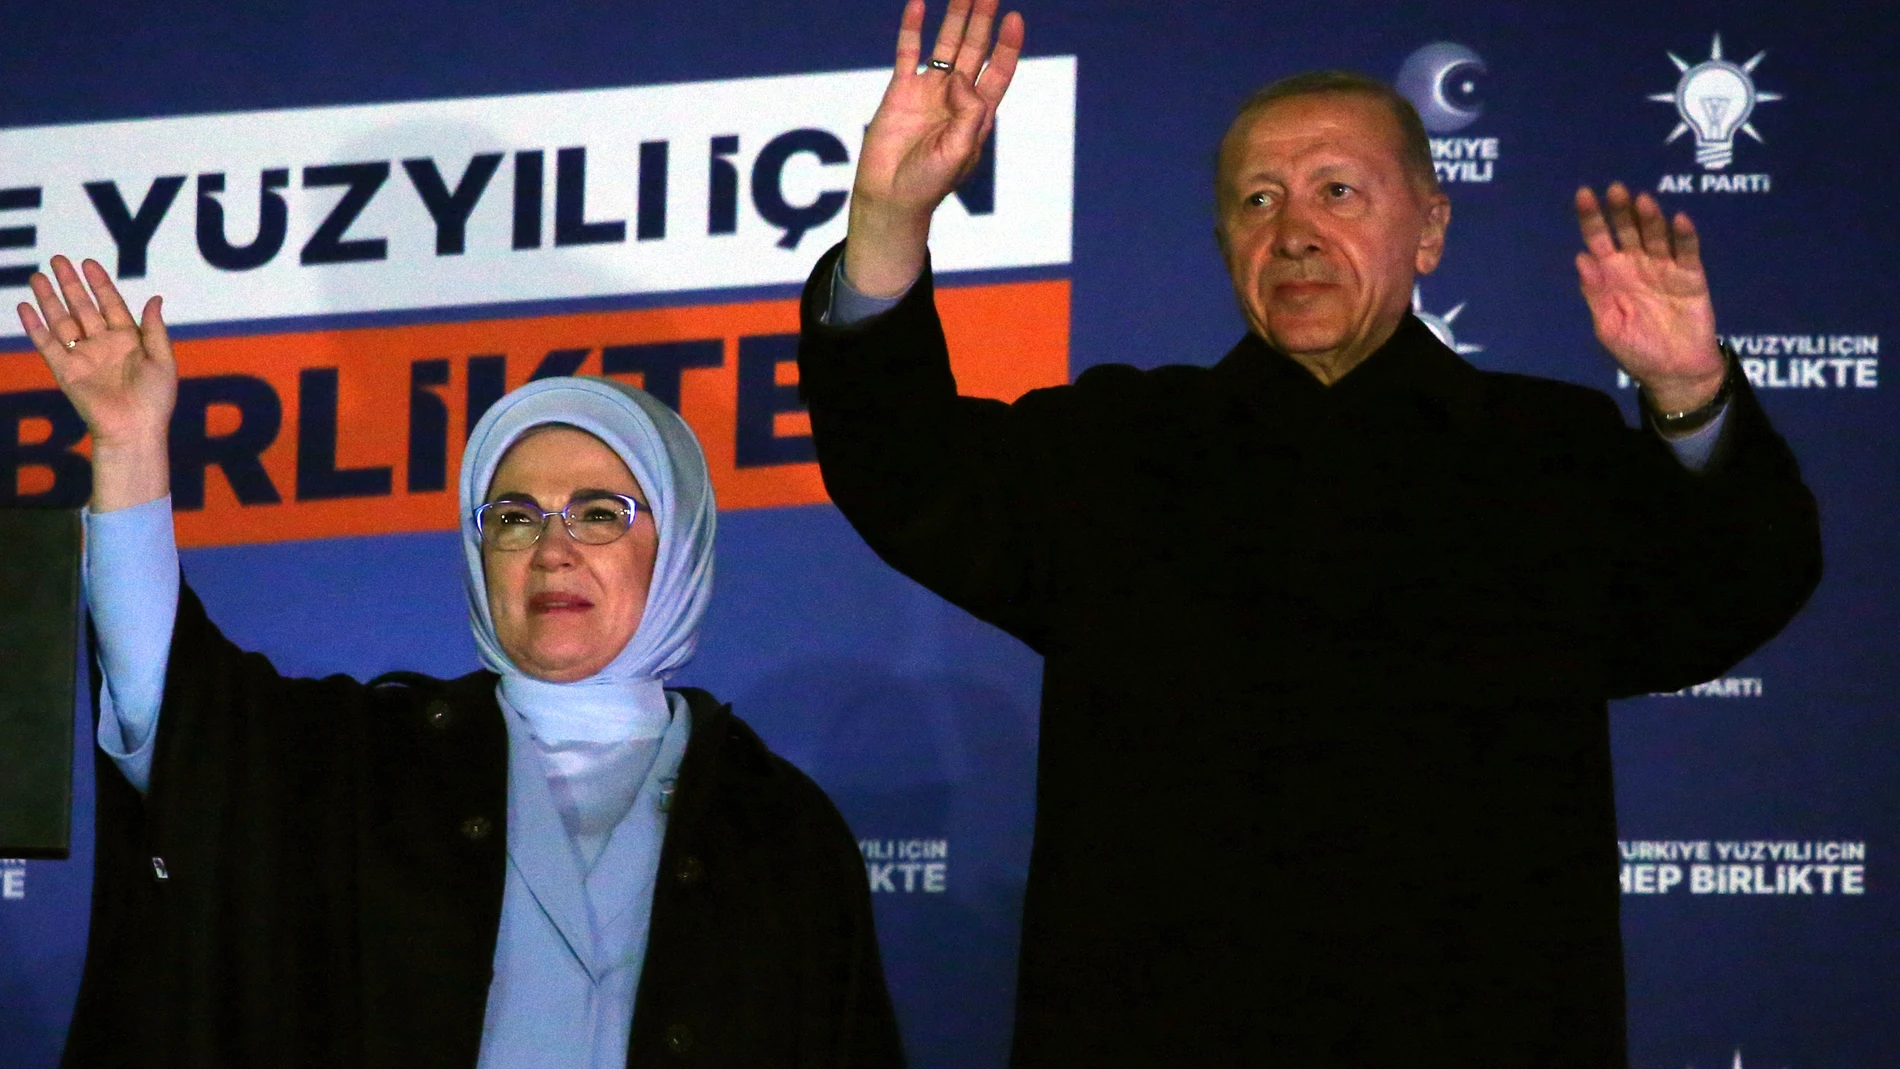 Turkish President Recep Tayyip Erdogan, right, and his wife Emine gesture to supporters at the party headquarters, in Ankara, Turkey, early Monday, May 15, 2023. Erdogan, who has ruled his country with an increasingly firm grip for 20 years, was locked in a tight election race Sunday, with a make-or-break runoff against his chief challenger possible as the final votes were counted. (AP Photo/Ali Unal)